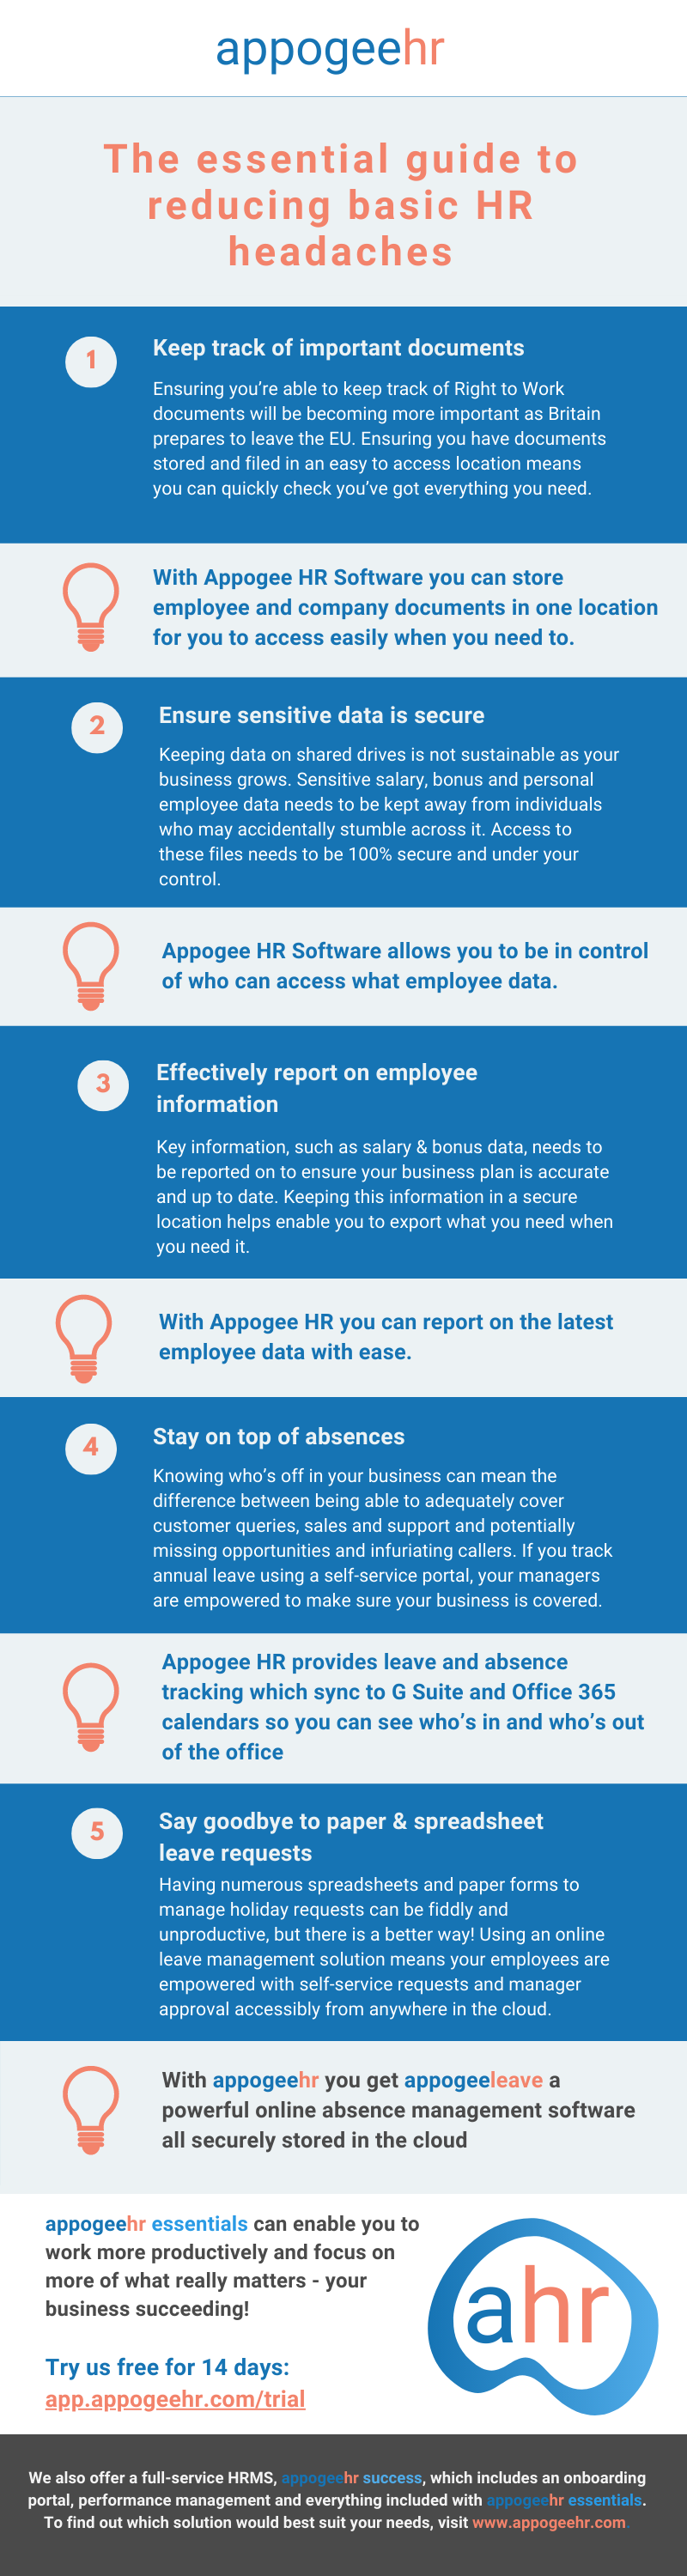 New brand The Essential Guide to Reducing Basic HR Headaches Infographic